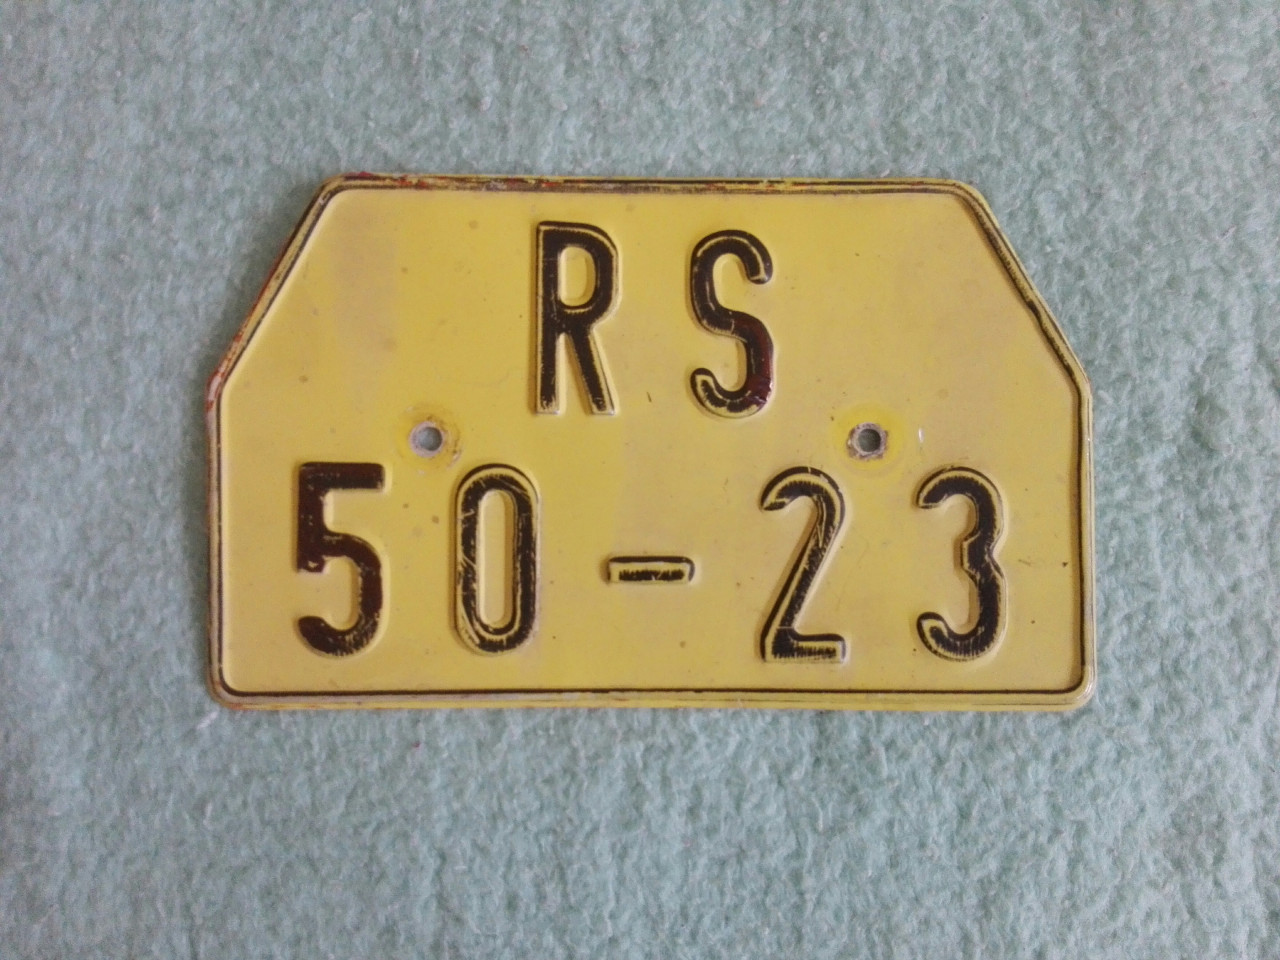 RS-50-23